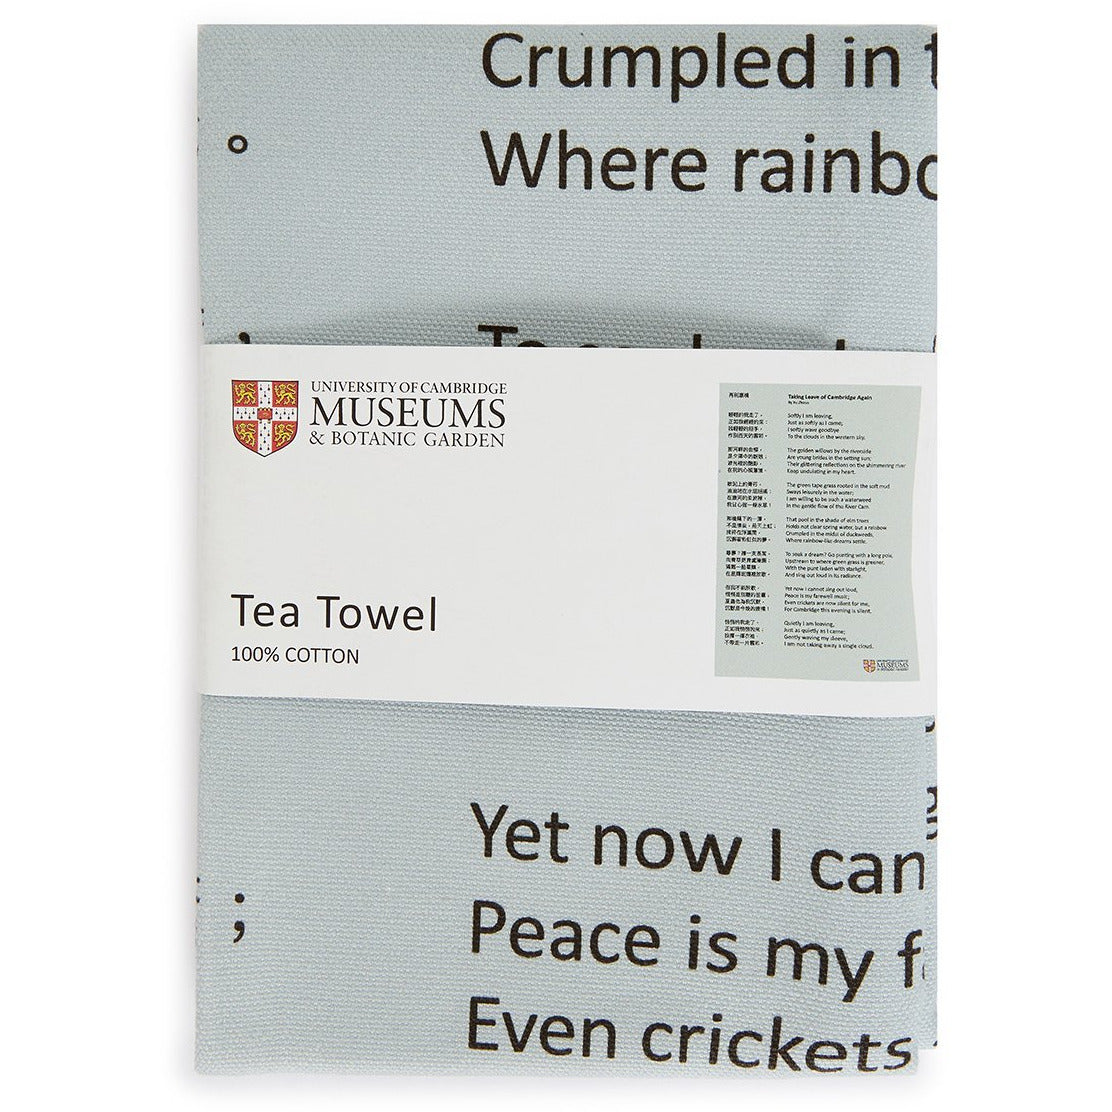 Linen tea towel - Xu Zhimo, Taking Leave of Cambridge again. Folded and packaged with belly band. Poem printed in Chinese and English translation. Brought to you by CuratingCambridge.co.uk